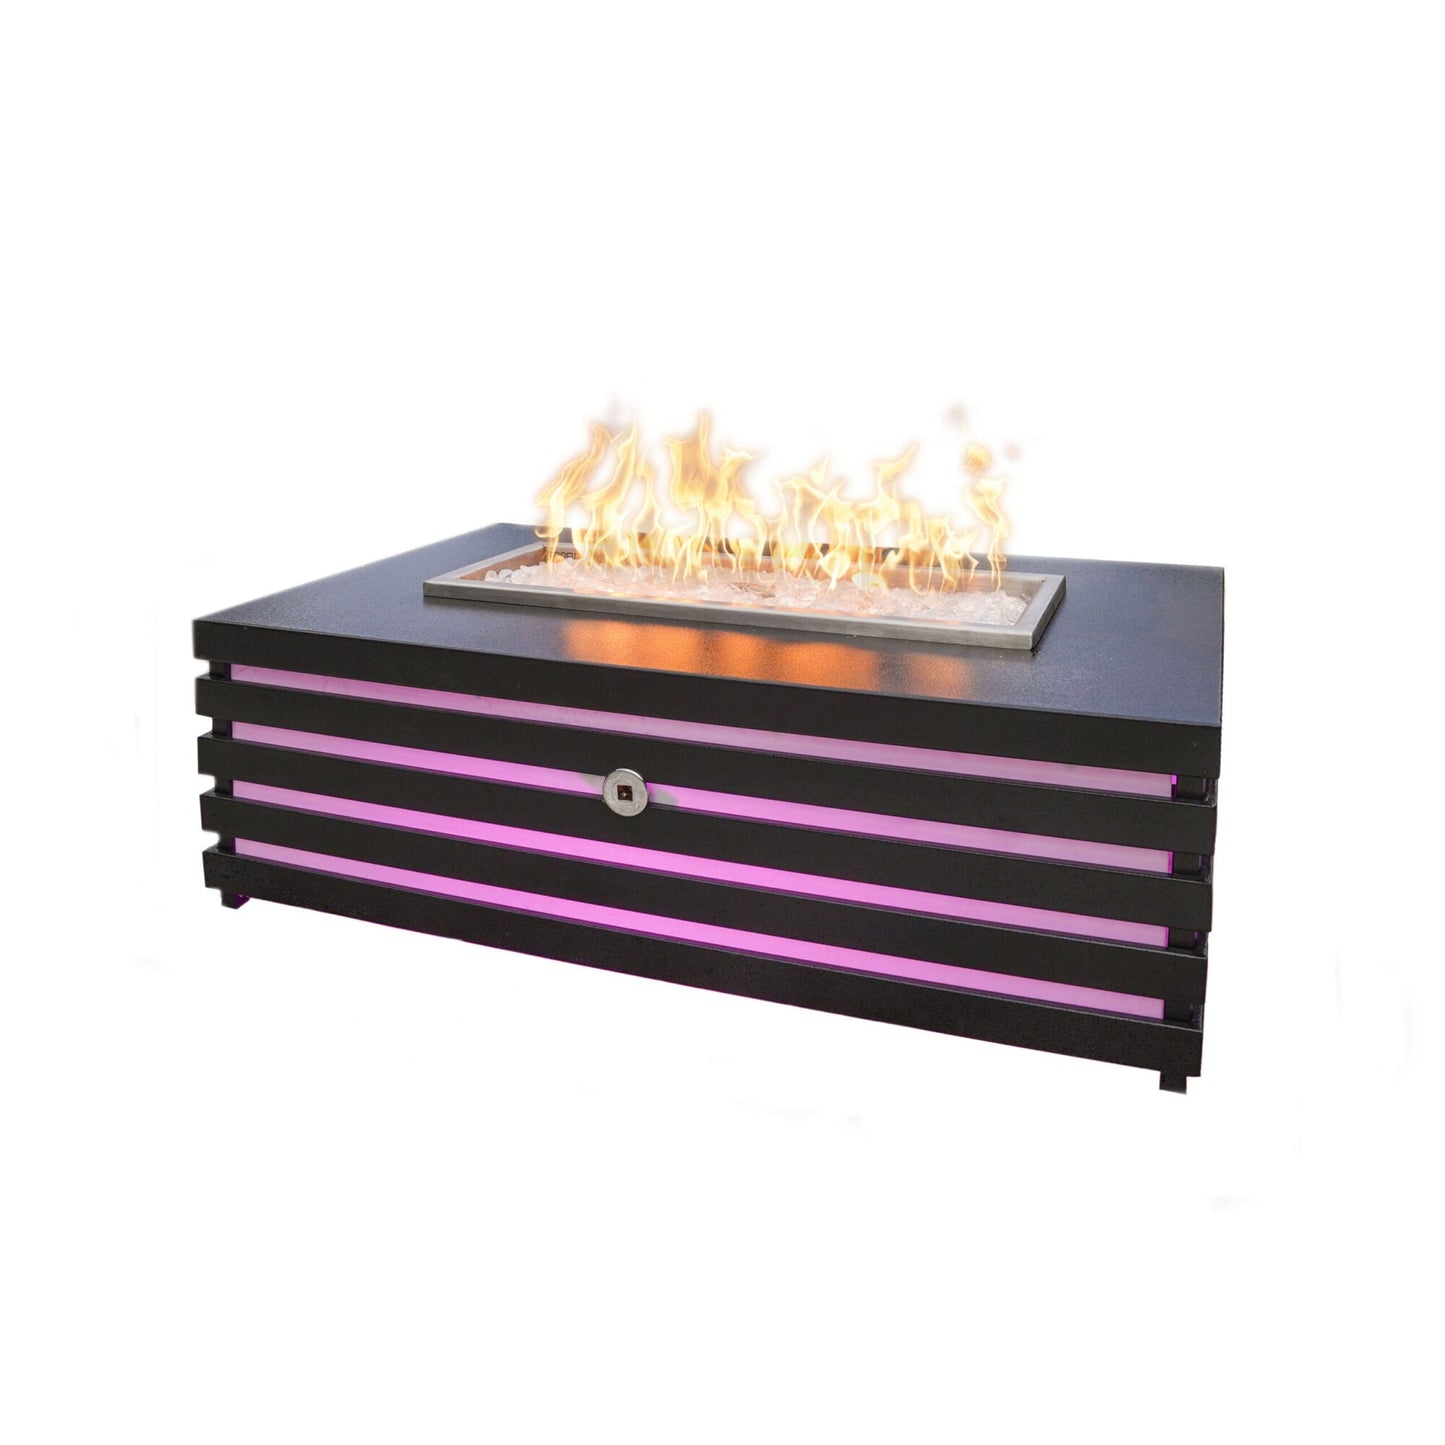 The Outdoor Plus Amina 72" Java Powder Coated Natural Gas Fire Pit with 110V Electronic Ignition